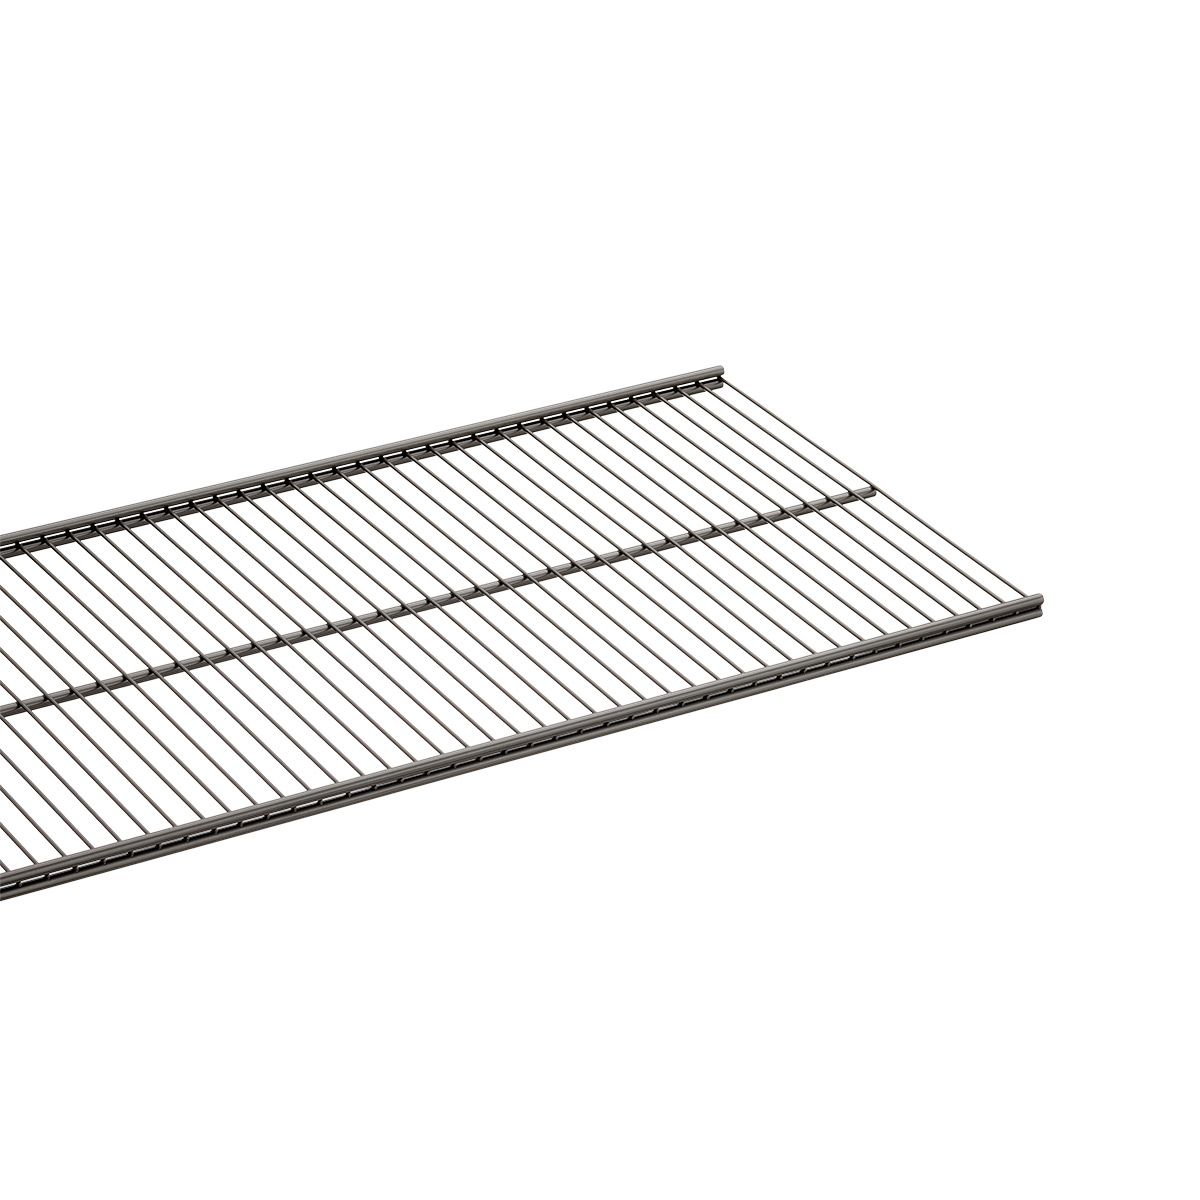 Elfa Ventilated Wire Shelves | The Container Store